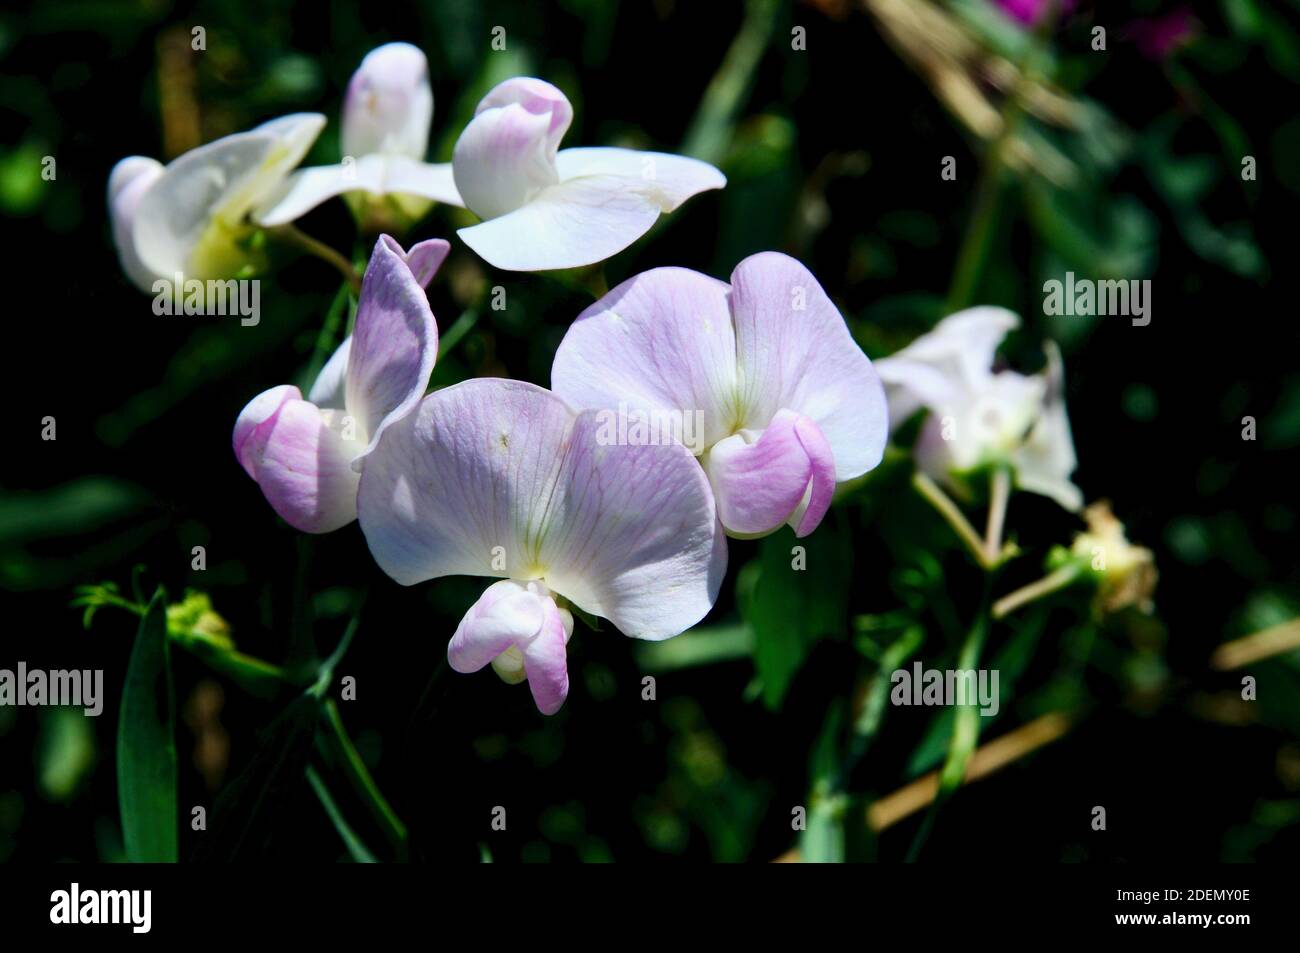 Lathyrus latifolius, Perennial Sweet Pea or Everlasting Pea is an old fashioned herbaceous perennial. Stock Photo